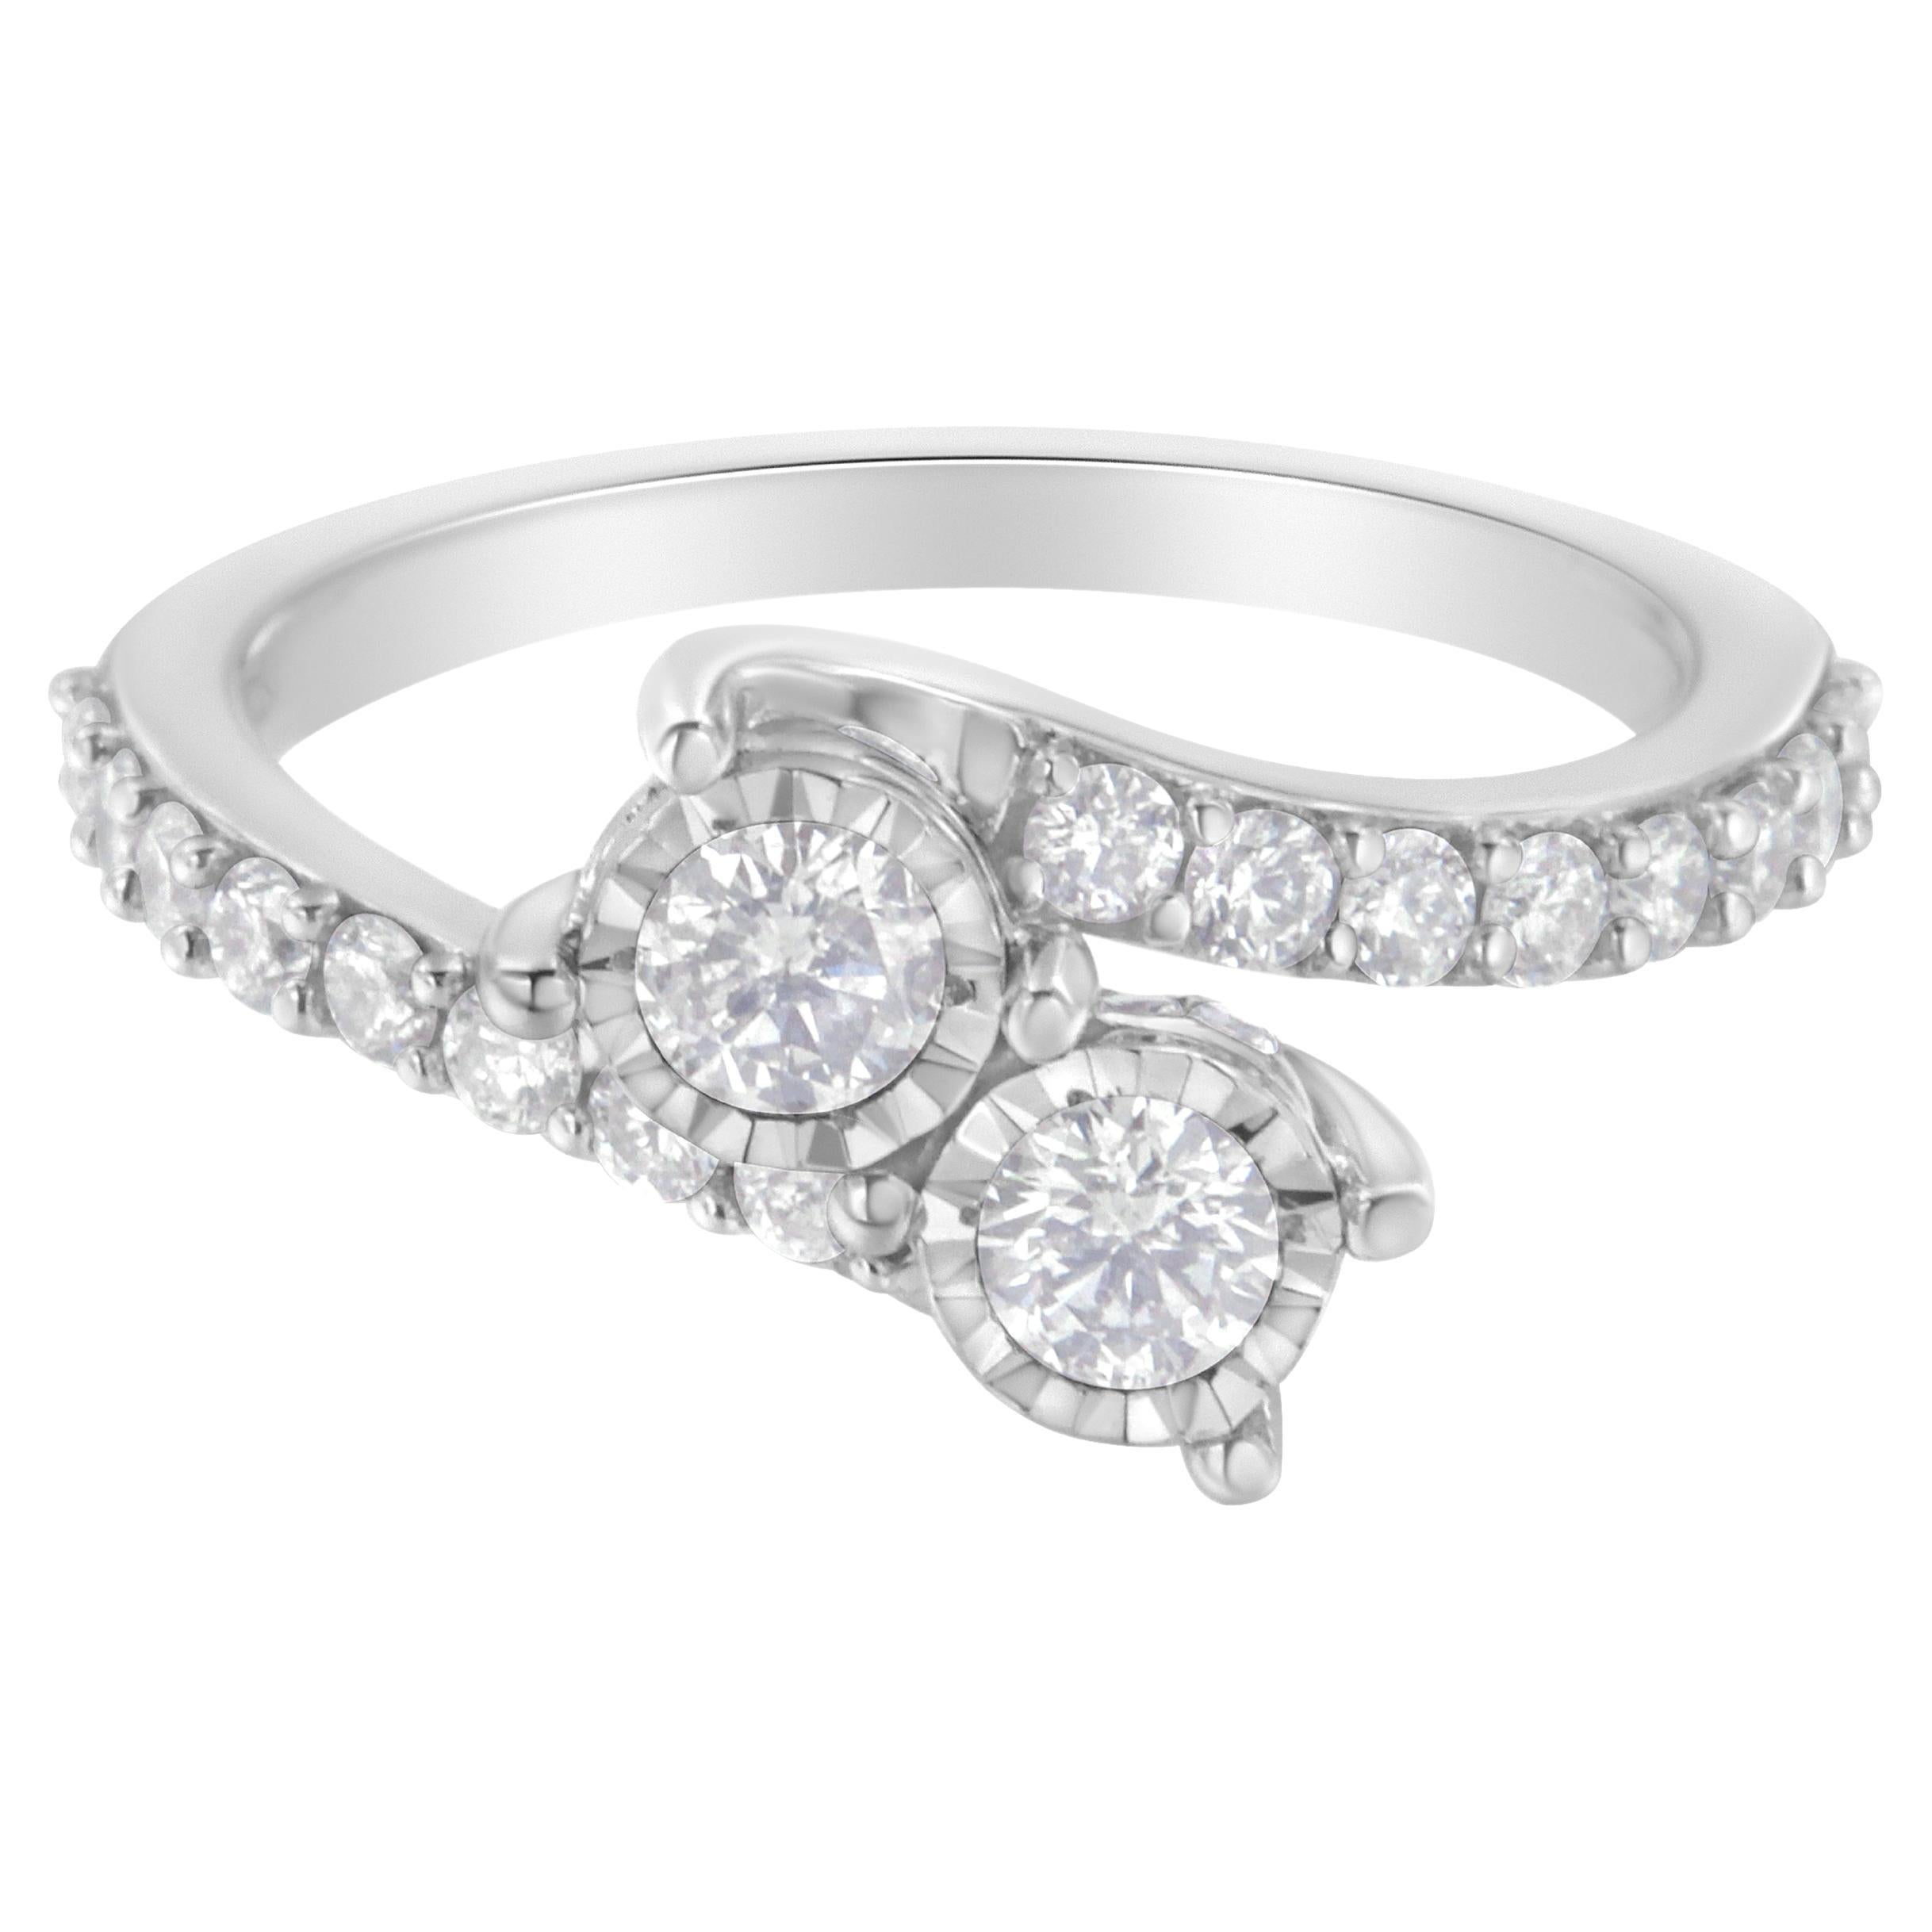 For Sale:  10K White Gold Two-Stone Miracle-Set 1.0 Carat Diamond Bypass Ring